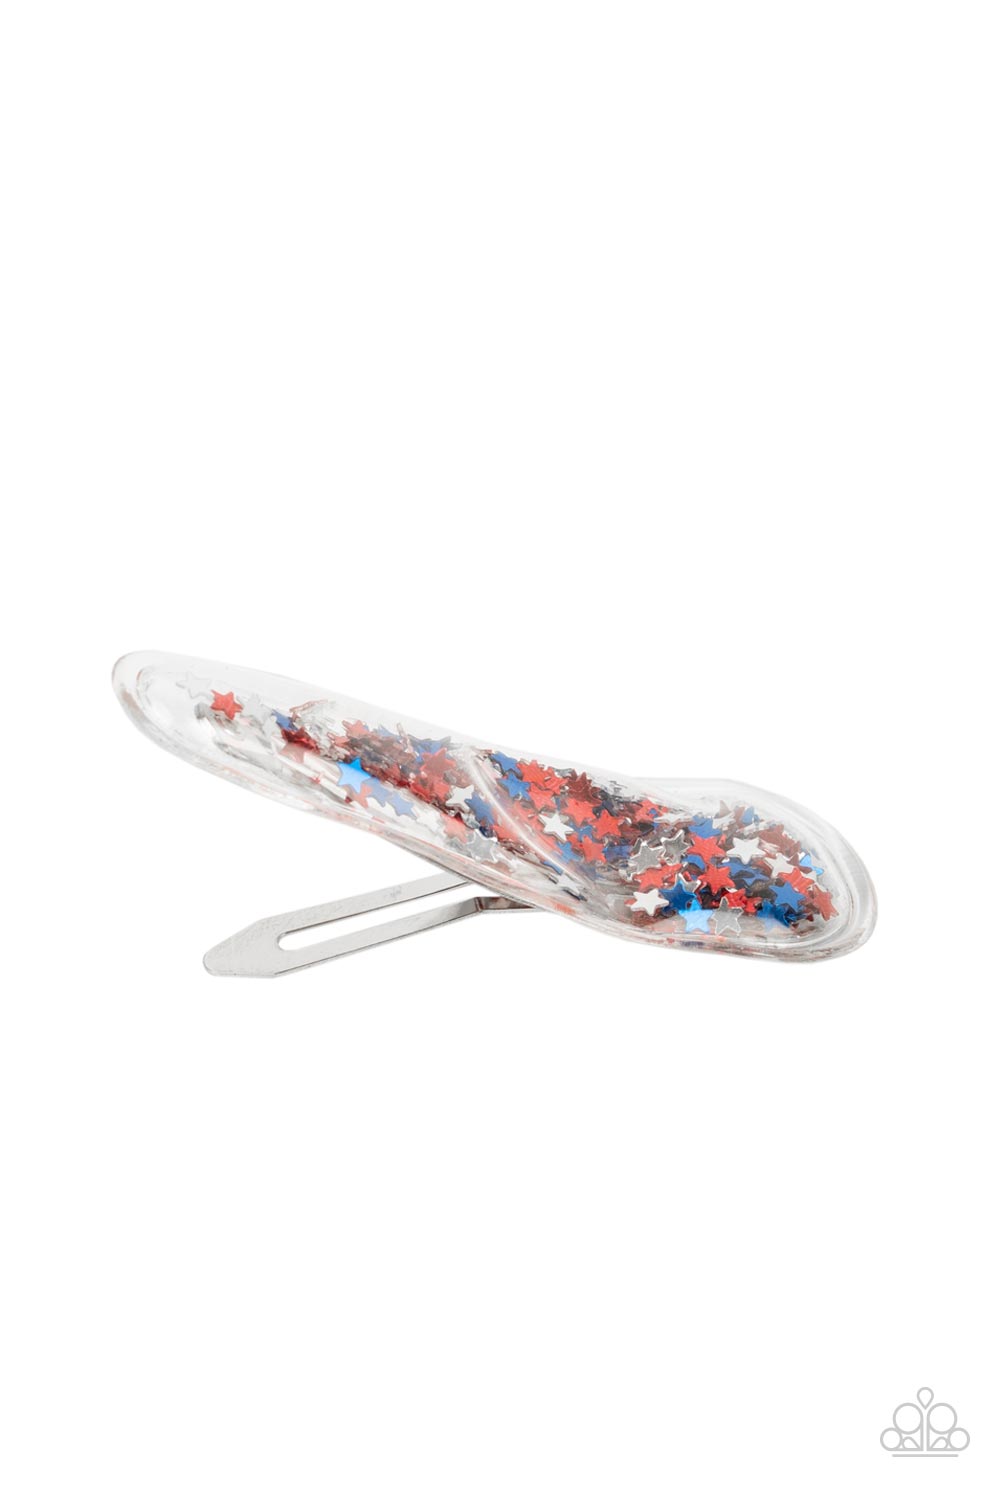 Oh, My Stars and Stripes - Multi Red, White, and Blue Star Hair Clip - Paparazzi Accessories